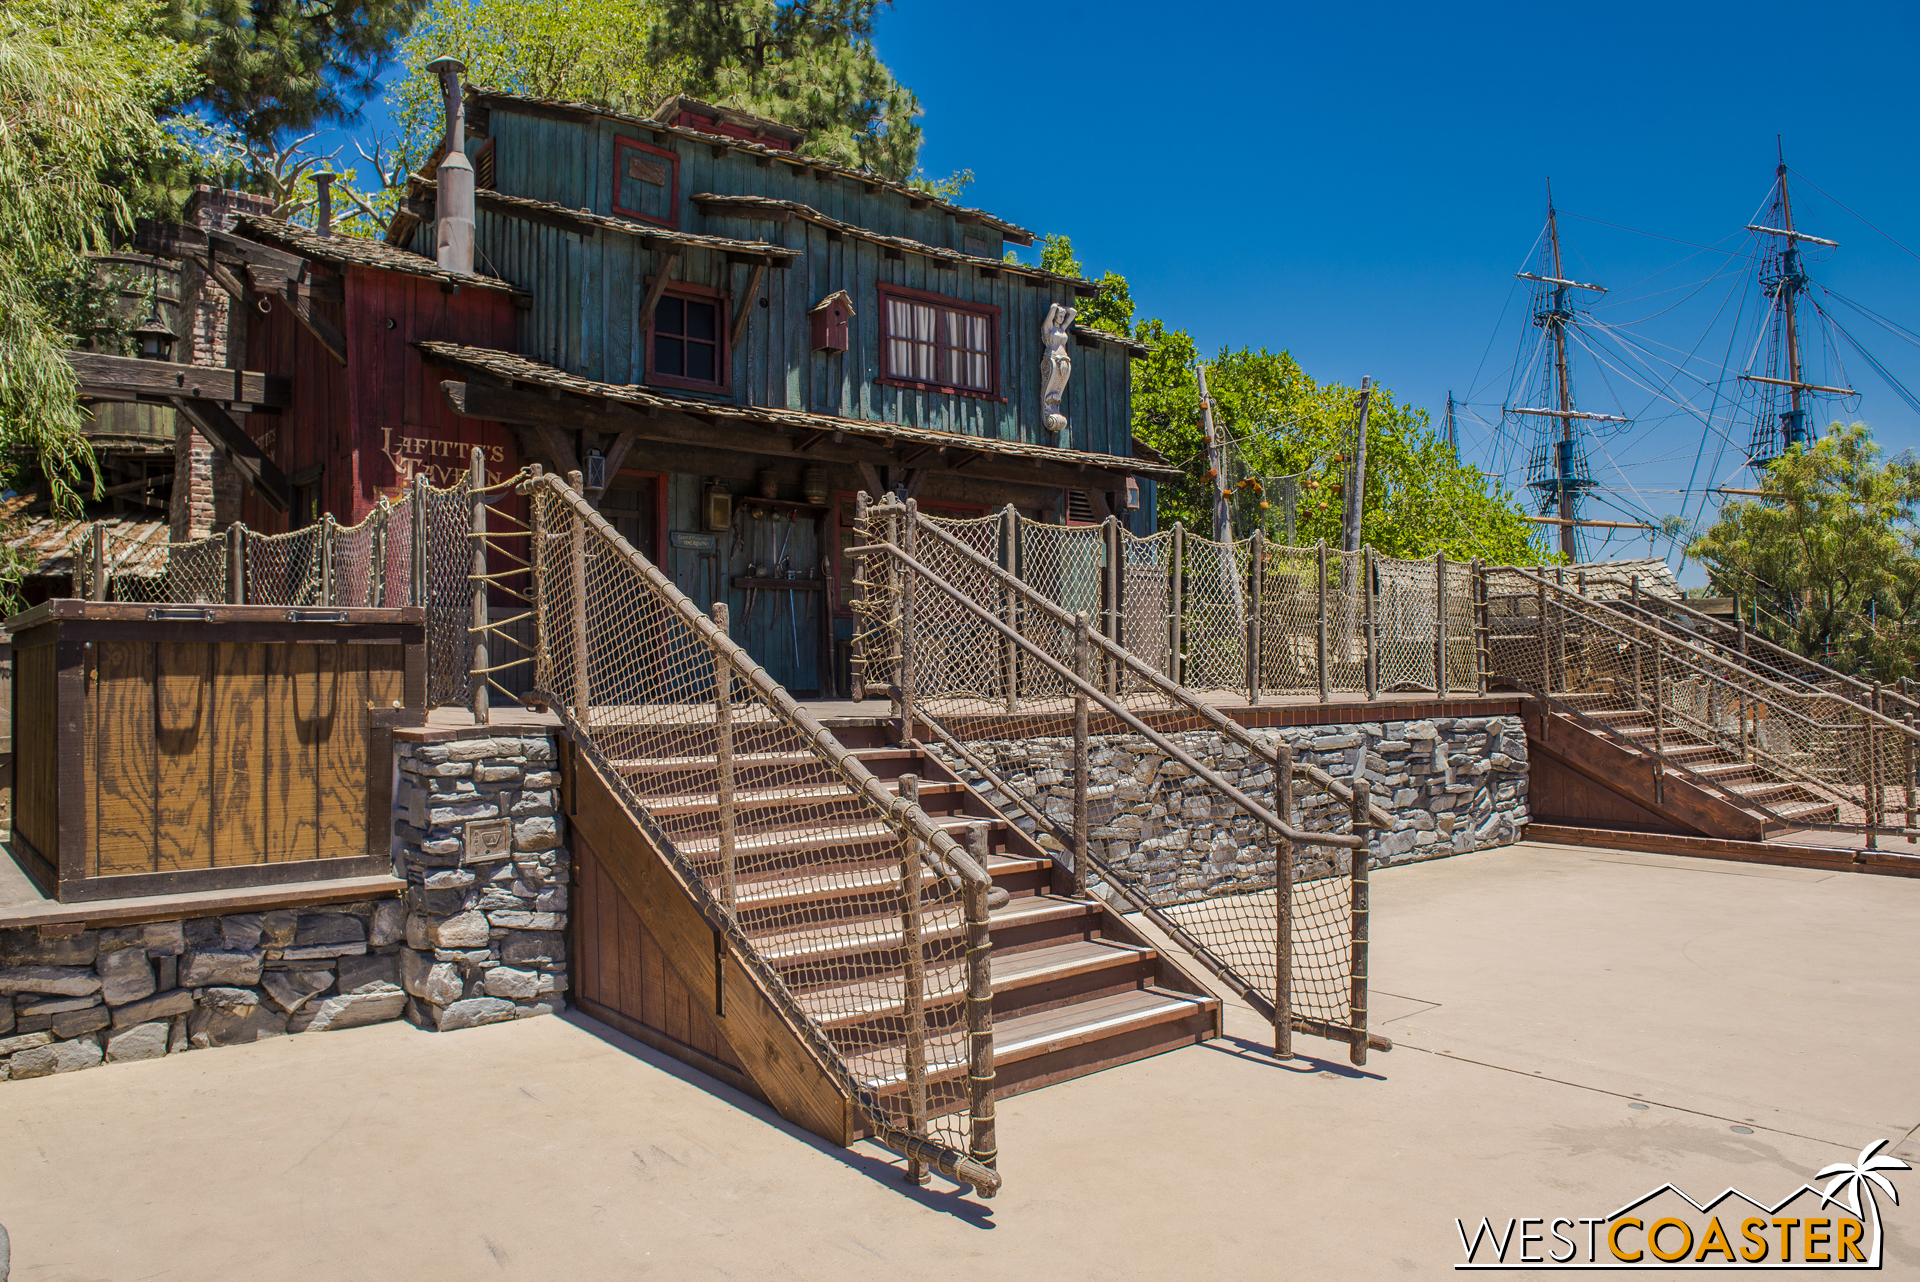  After taking the rafts across the Rivers of America to Tom Sawyer Island, we check out the FANTASMIC stage area in front of Lafitte's Tavern. 